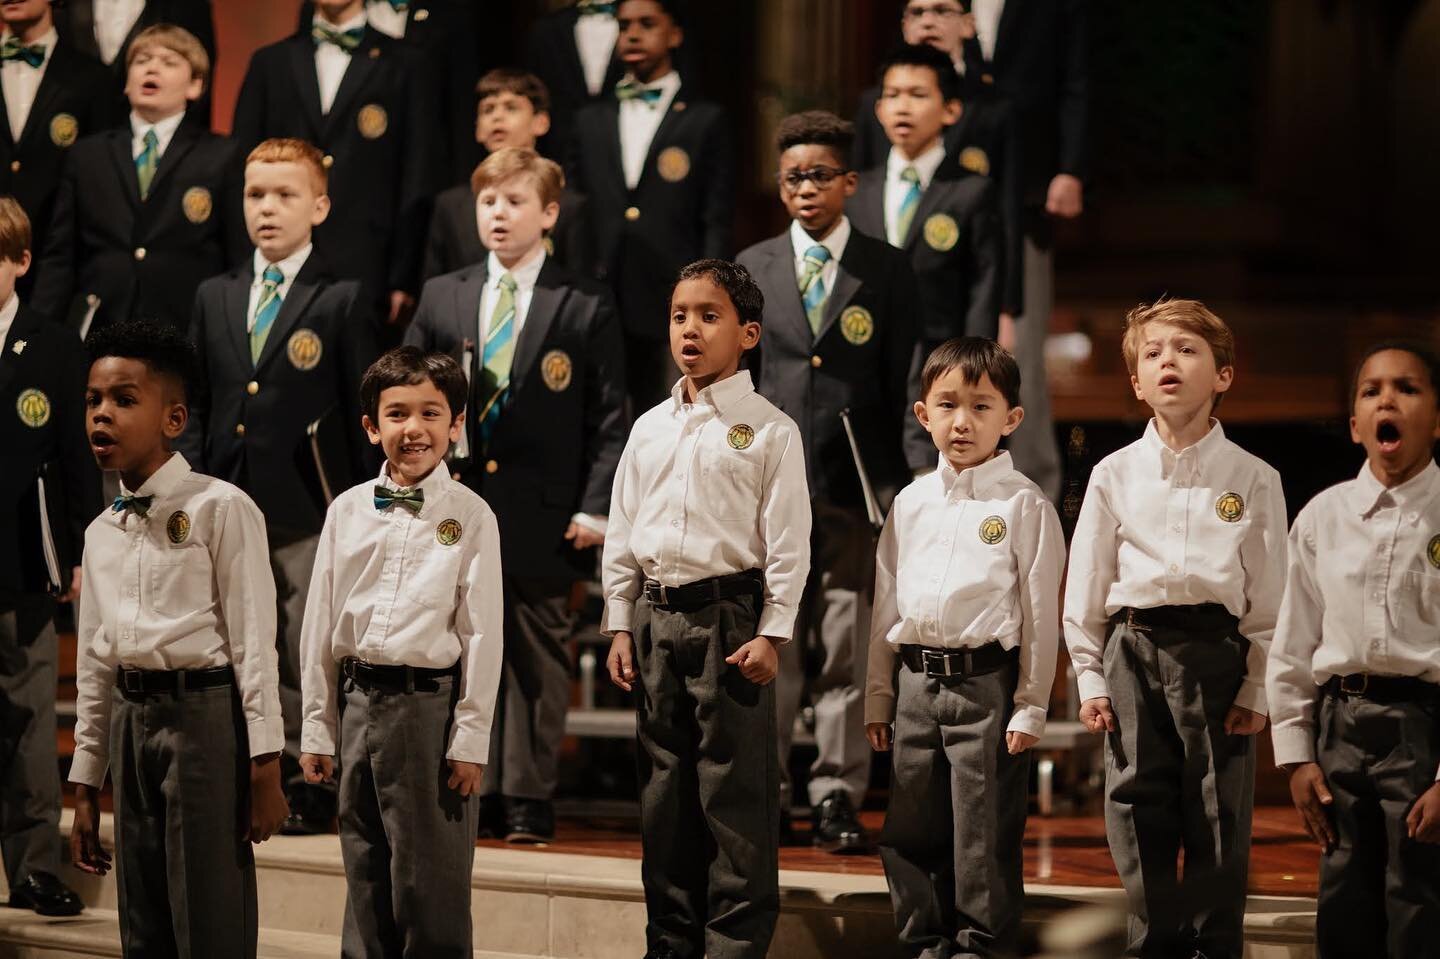 It may still be a little early but we're ALWAYS extra excited for Christmas! So if you're like us, get your tickets to Christmas with the Georgia Boy Choir early at the link in our bio! 🎄

#Georgia #Atlanta #BoyChoir #BoysChoir #Choir #GeorgiaBoyCho